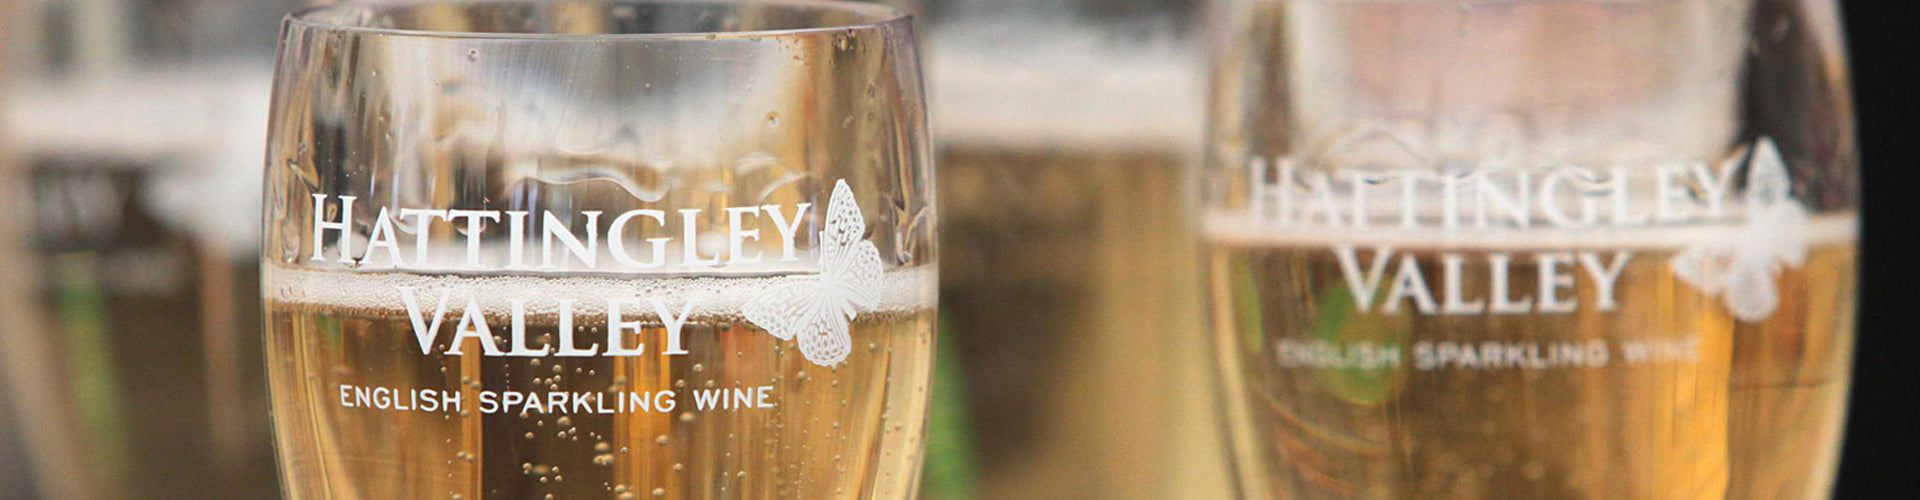 Hattingley Valley English Sparkling Wines from Hampshire